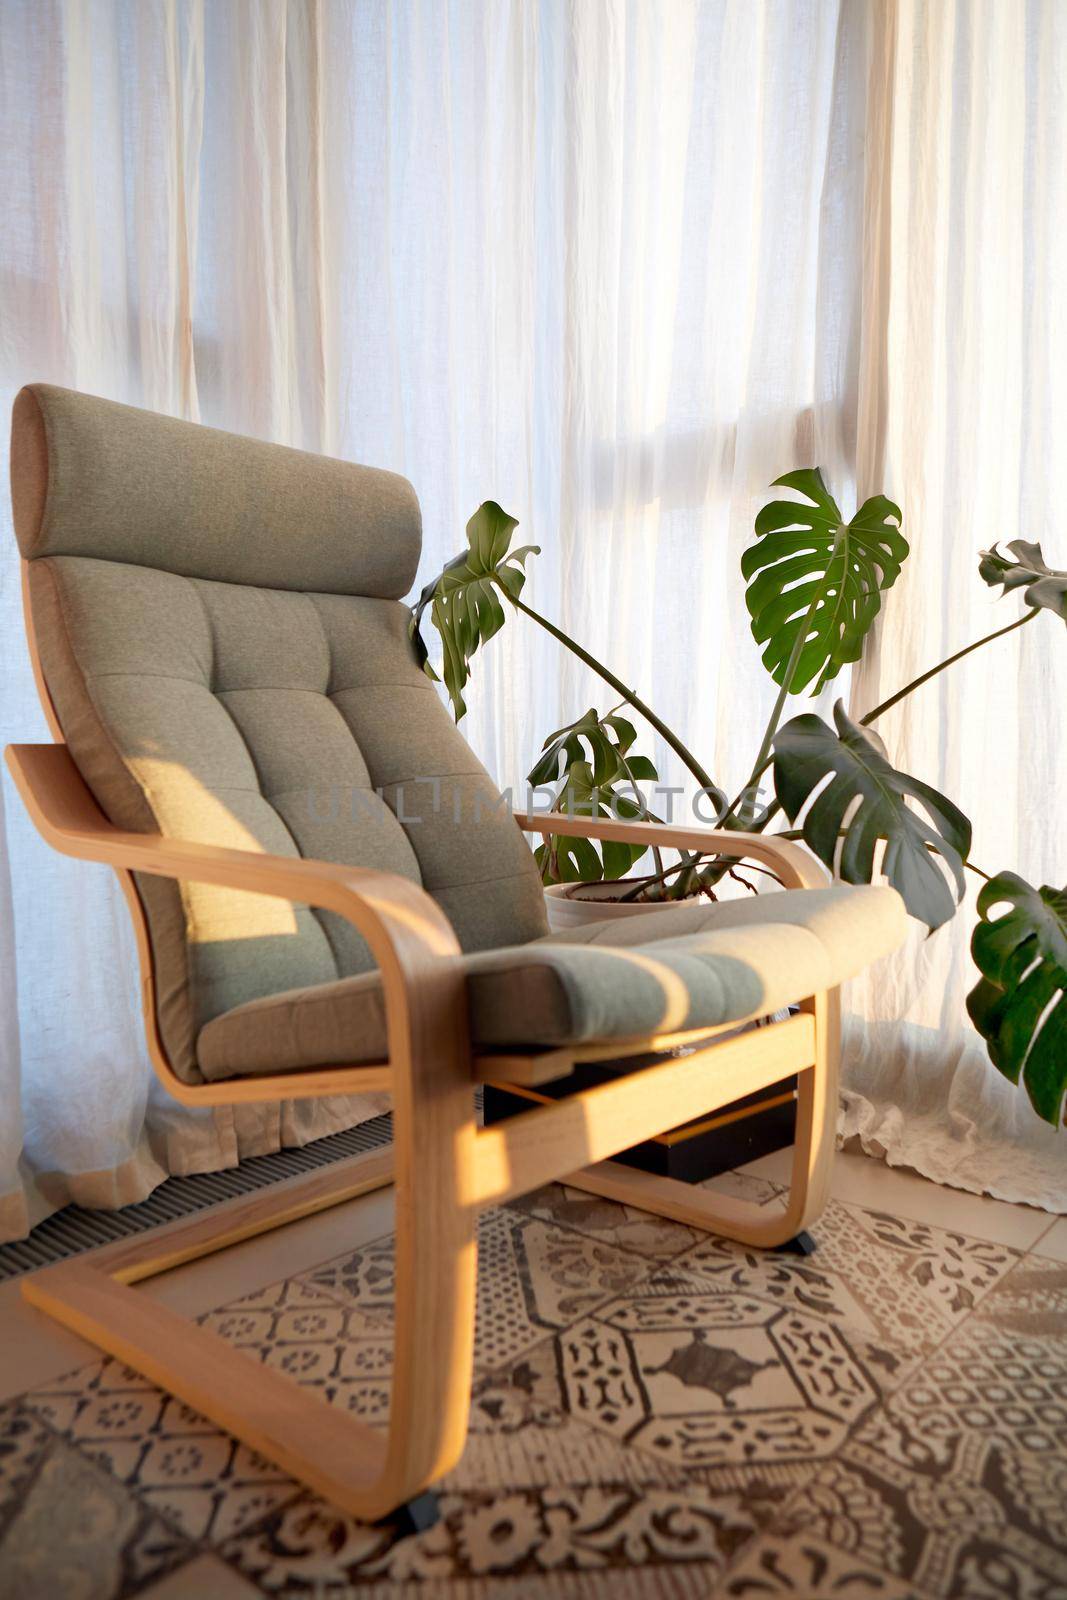 Comfortable wooden rocking chair with soft gray seat placed on cozy room near potted Monstera deliciosa plant in sunlight